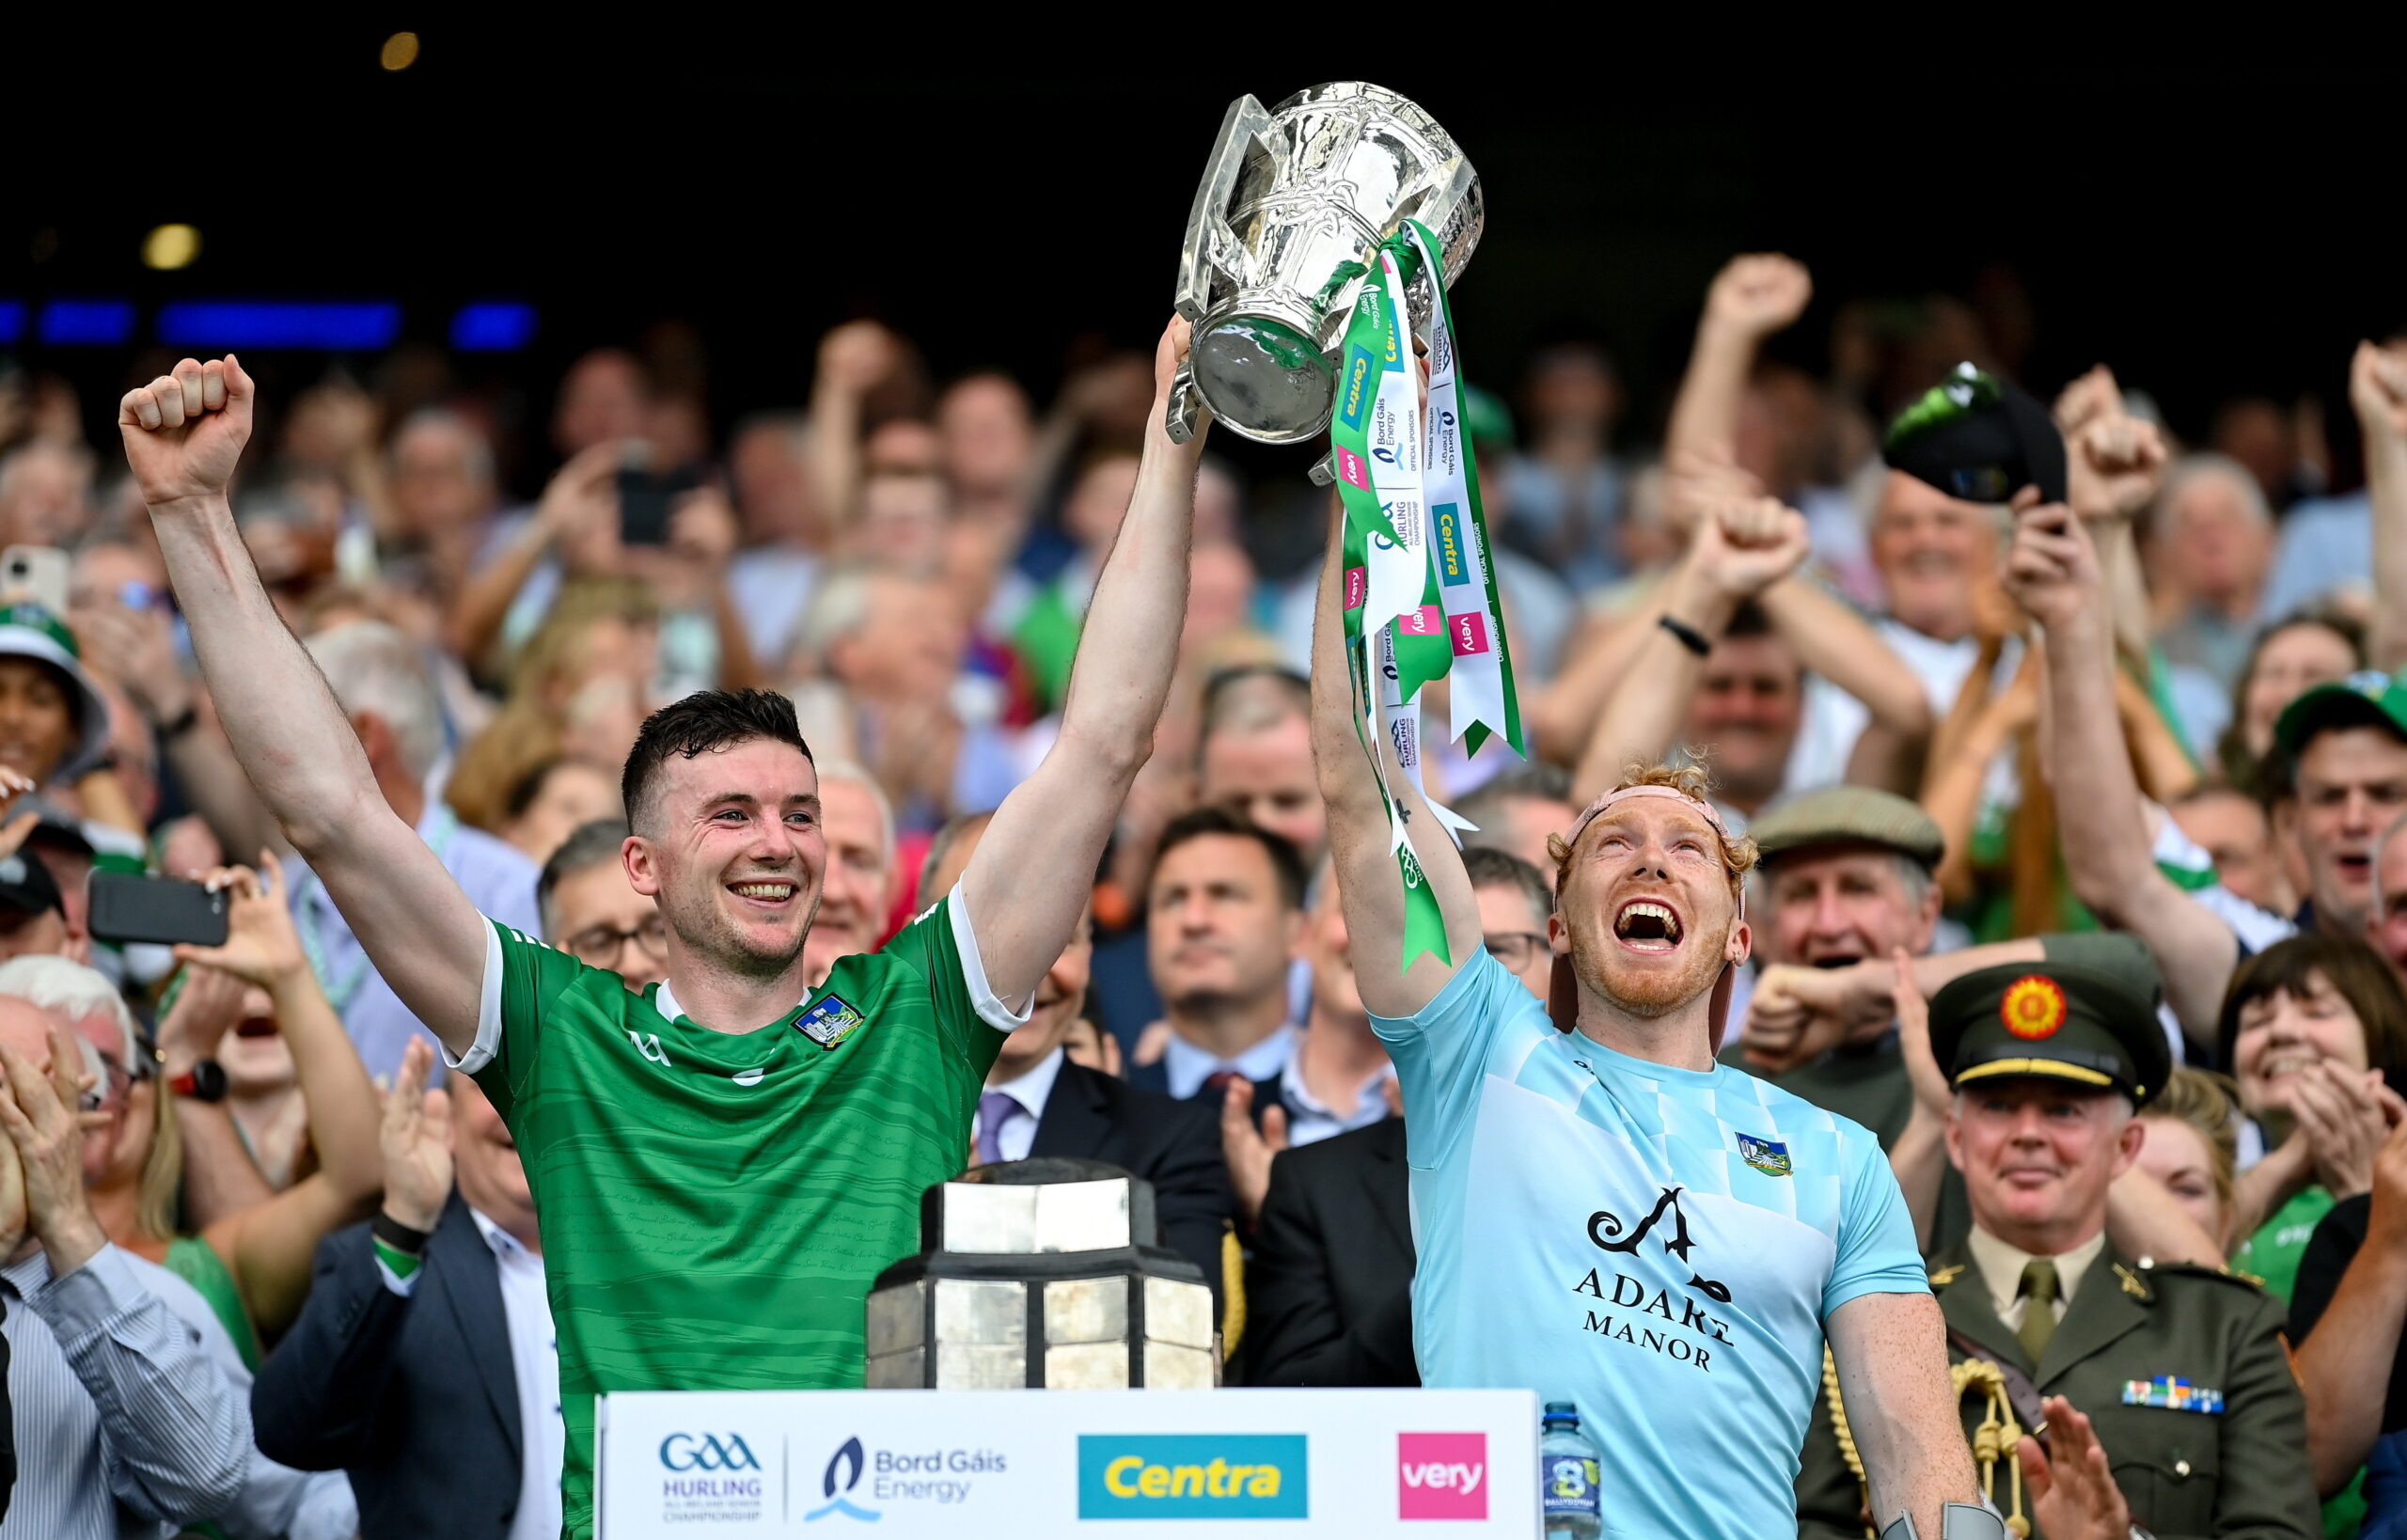 A jam-packed Sunday coming up in the Allianz Football League:, Limerick GAA